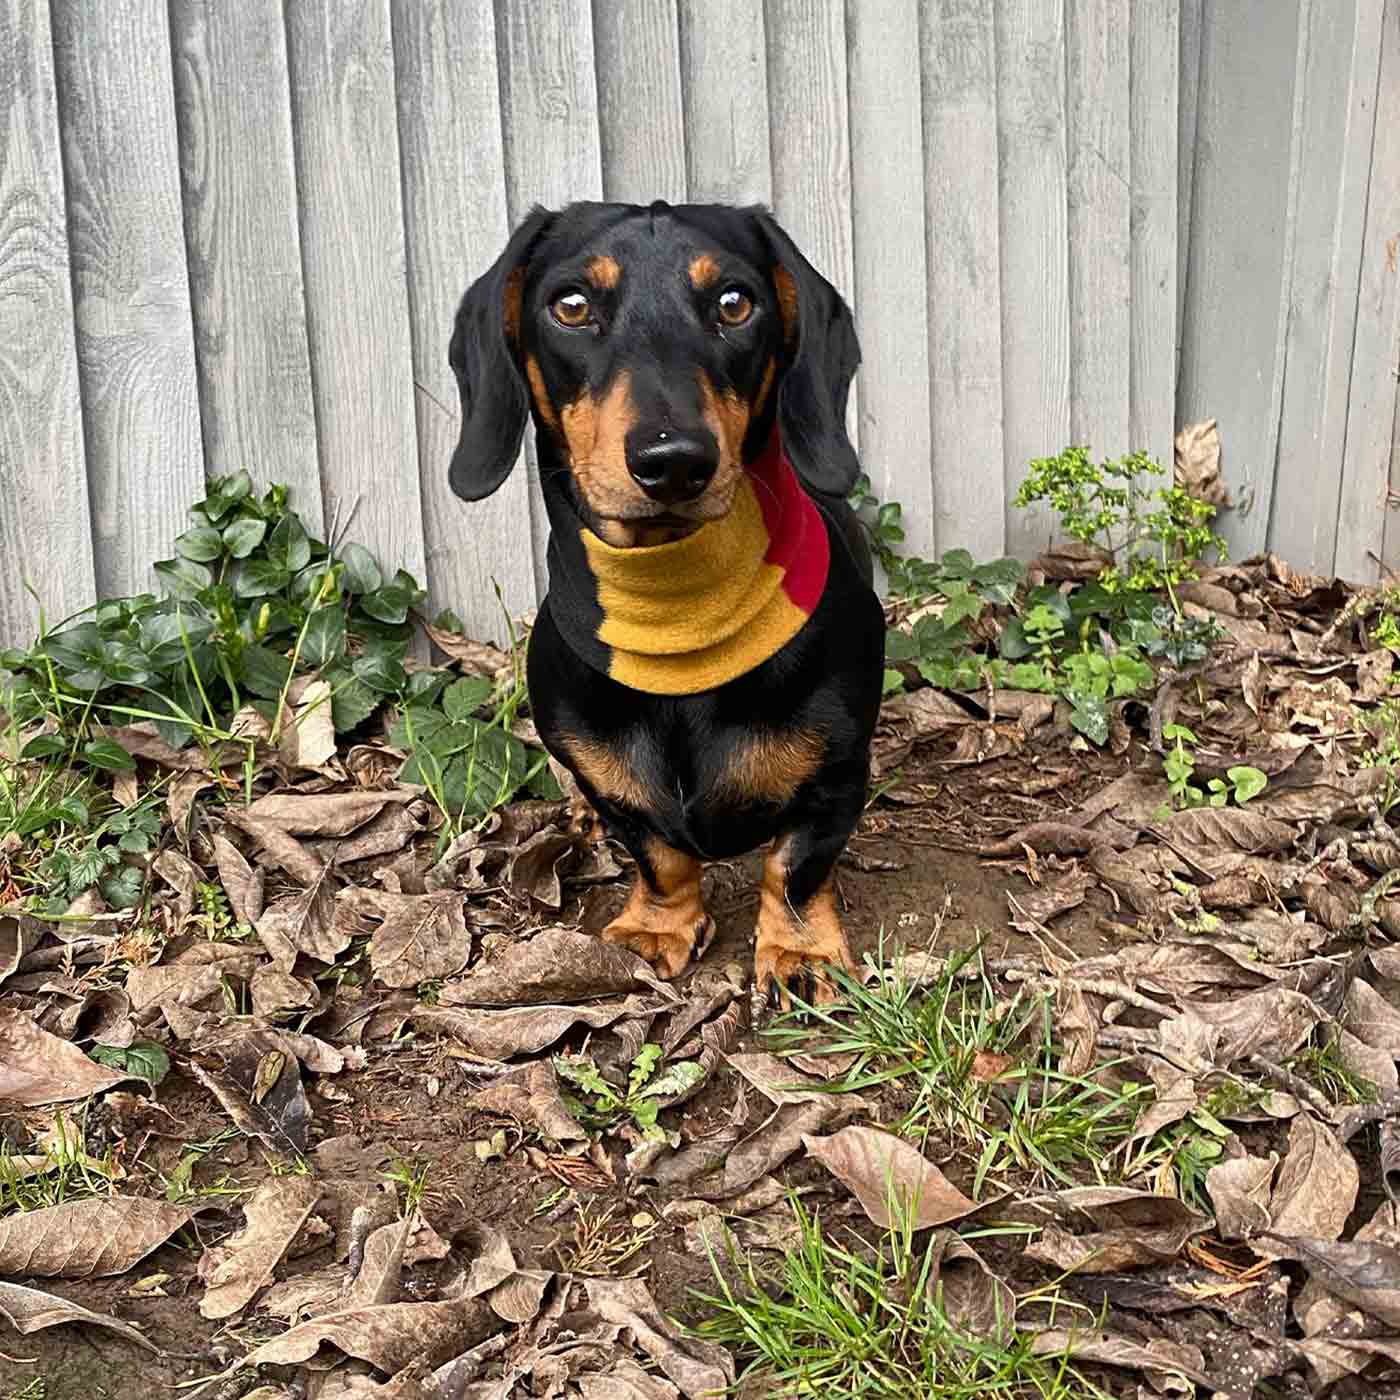  Accessorise Your Pet, With Our Stunning Snood For Dachshunds! Comes In One Size, And Totally Machine Washable, Available To Personalise Now at Lords & Labradors